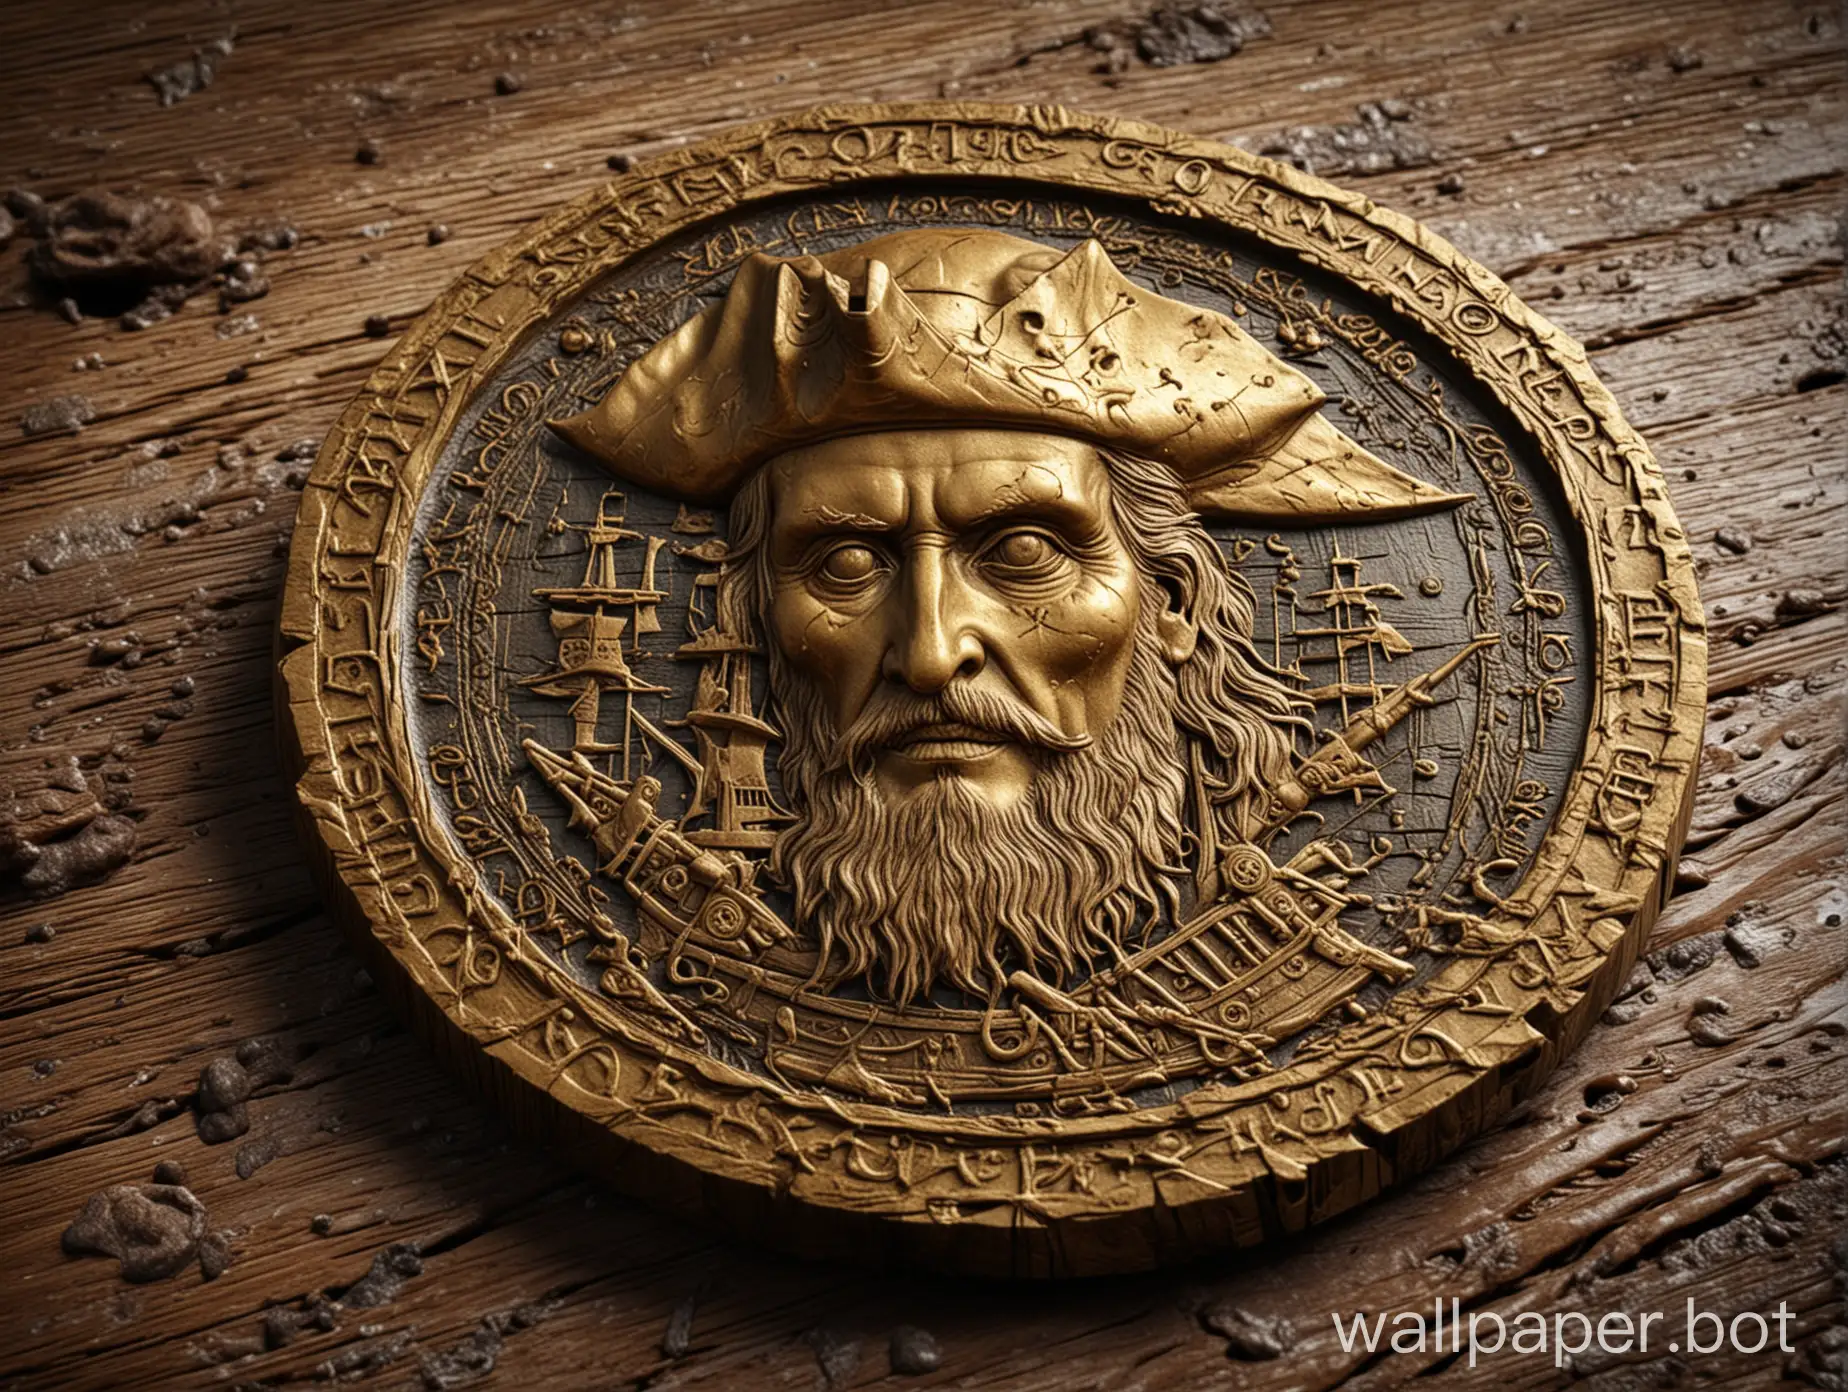 A stunning, detailed close-up illustration of an ancient pirate gold coin. The worn and weathered surface of the coin reveals intricate engravings and designs. The coin is set against a backdrop of wooden planks, evoking the feel of a pirate ship. The image is beautifully rendered in a mix of photography, 3D rendering, and painting techniques, creating a unique and captivating visual experience.